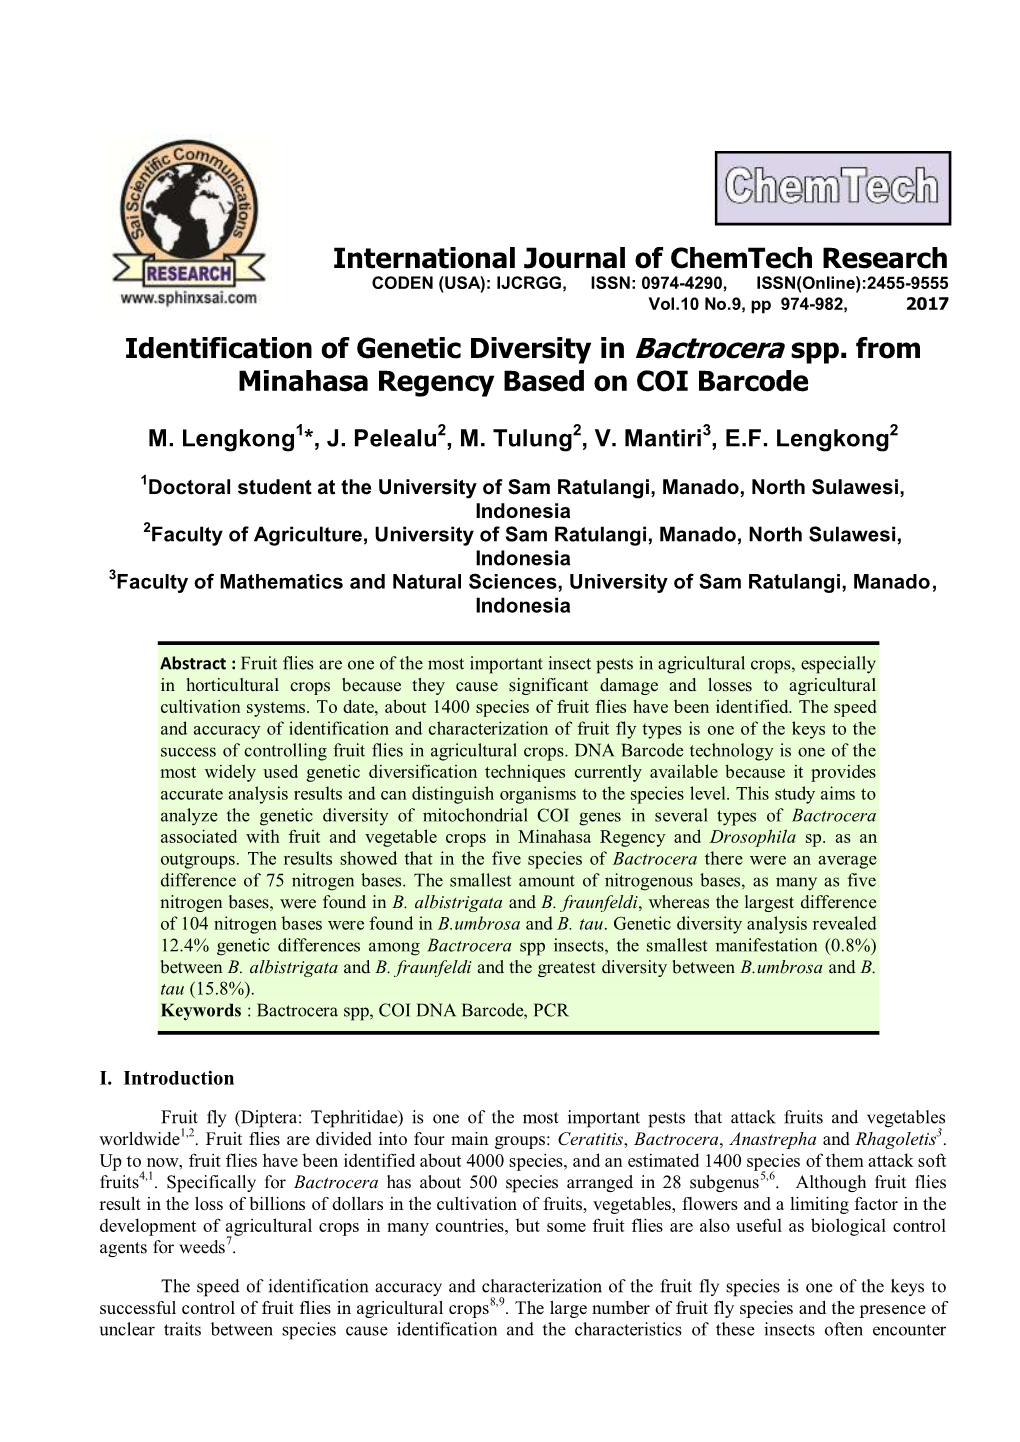 Identification of Genetic Diversity in Bactrocera Spp. from Minahasa Regency Based on COI Barcode International Journal of Chemt